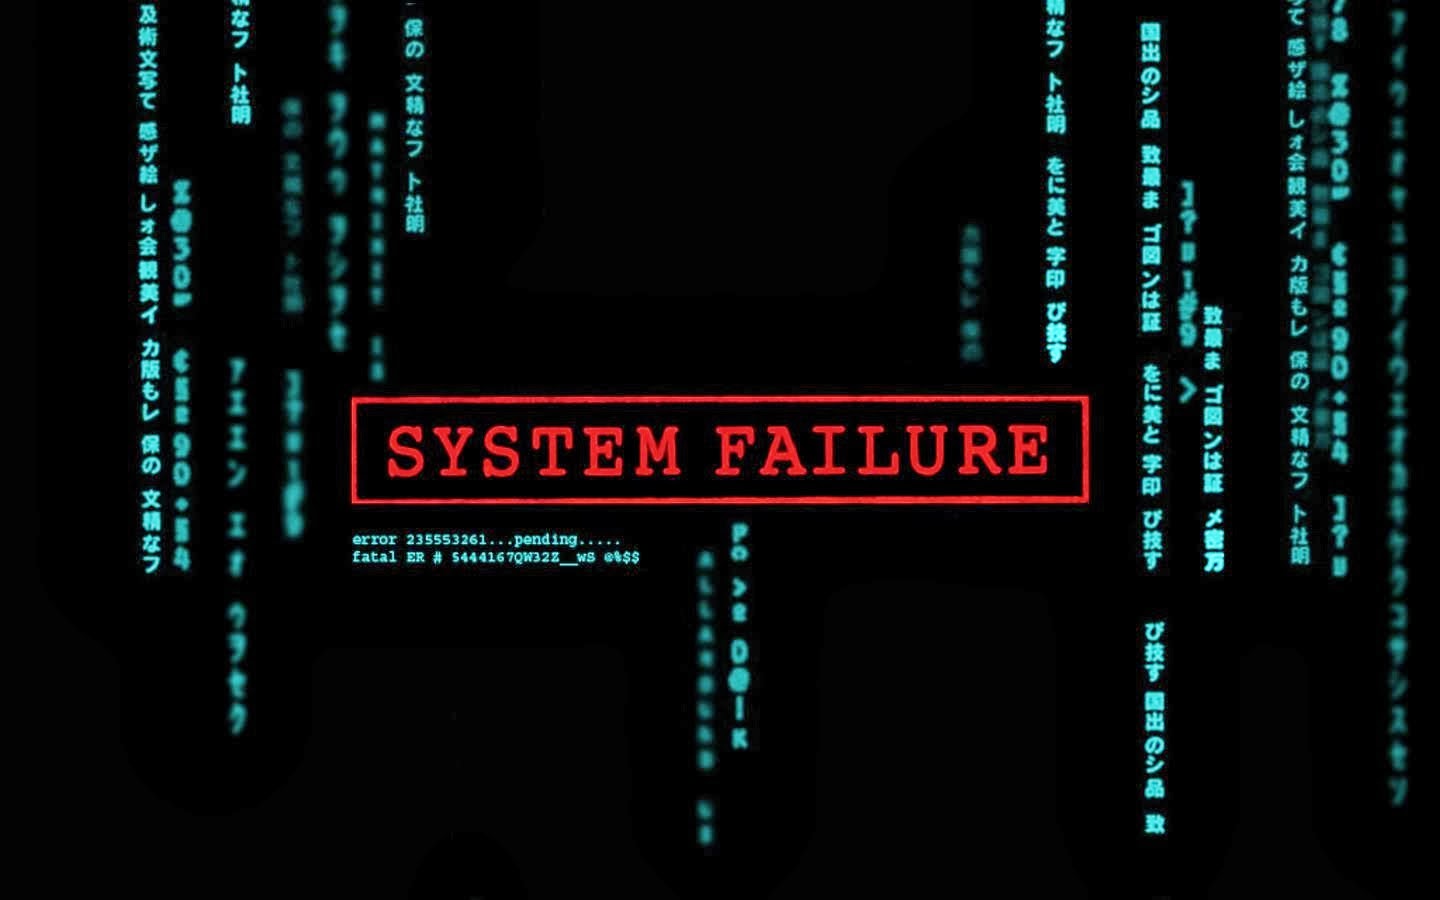 These systems are failing. System failure. System failure обои. System failure Matrix. Компьютерный код System failure.